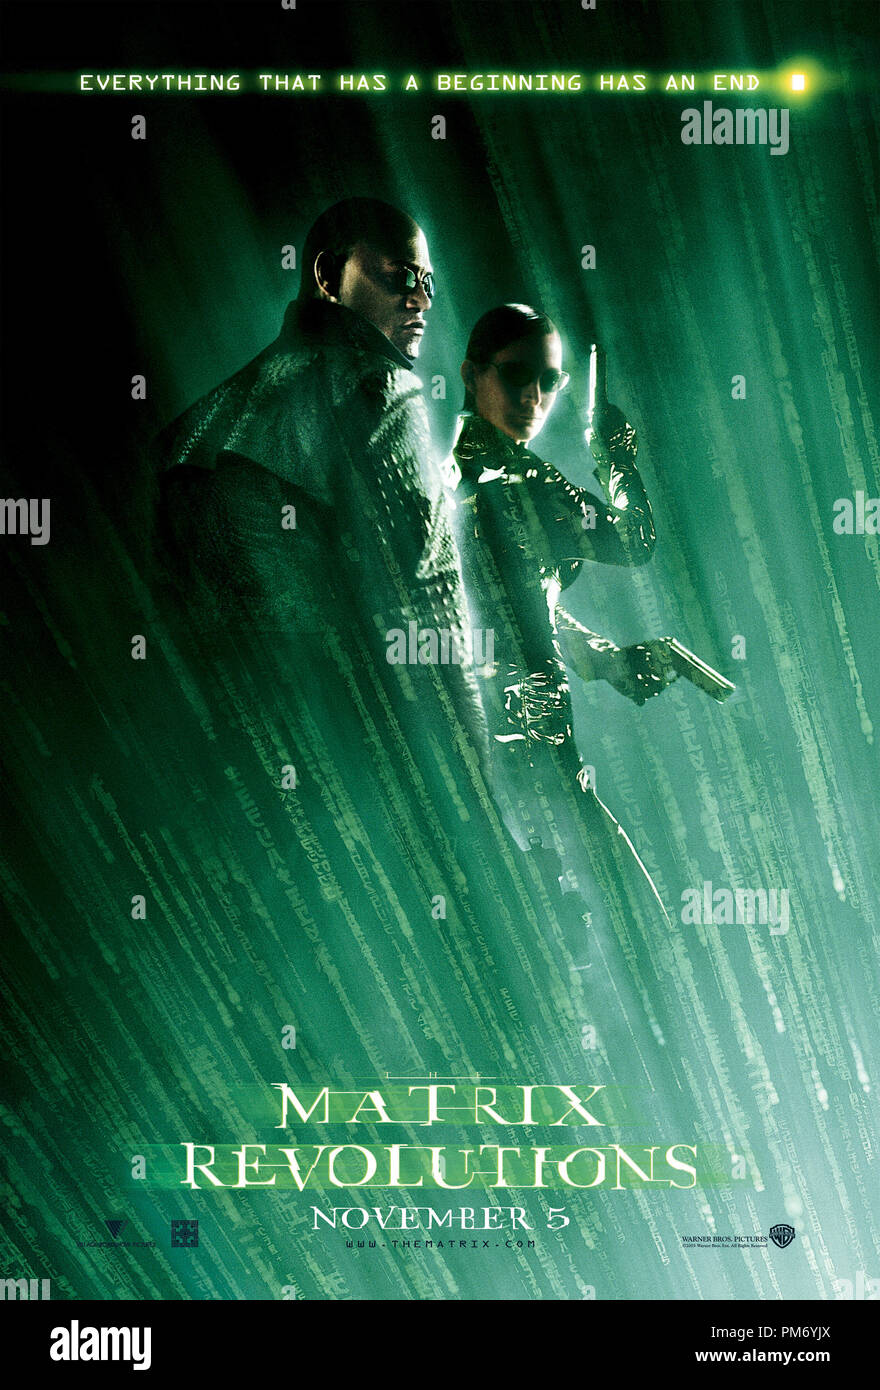 Studio Publicity Still from 'The Matrix Revolutions' Morpheus and Trinity Poster © 2003 Warner  File Reference # 307531015THA  For Editorial Use Only -  All Rights Reserved Stock Photo